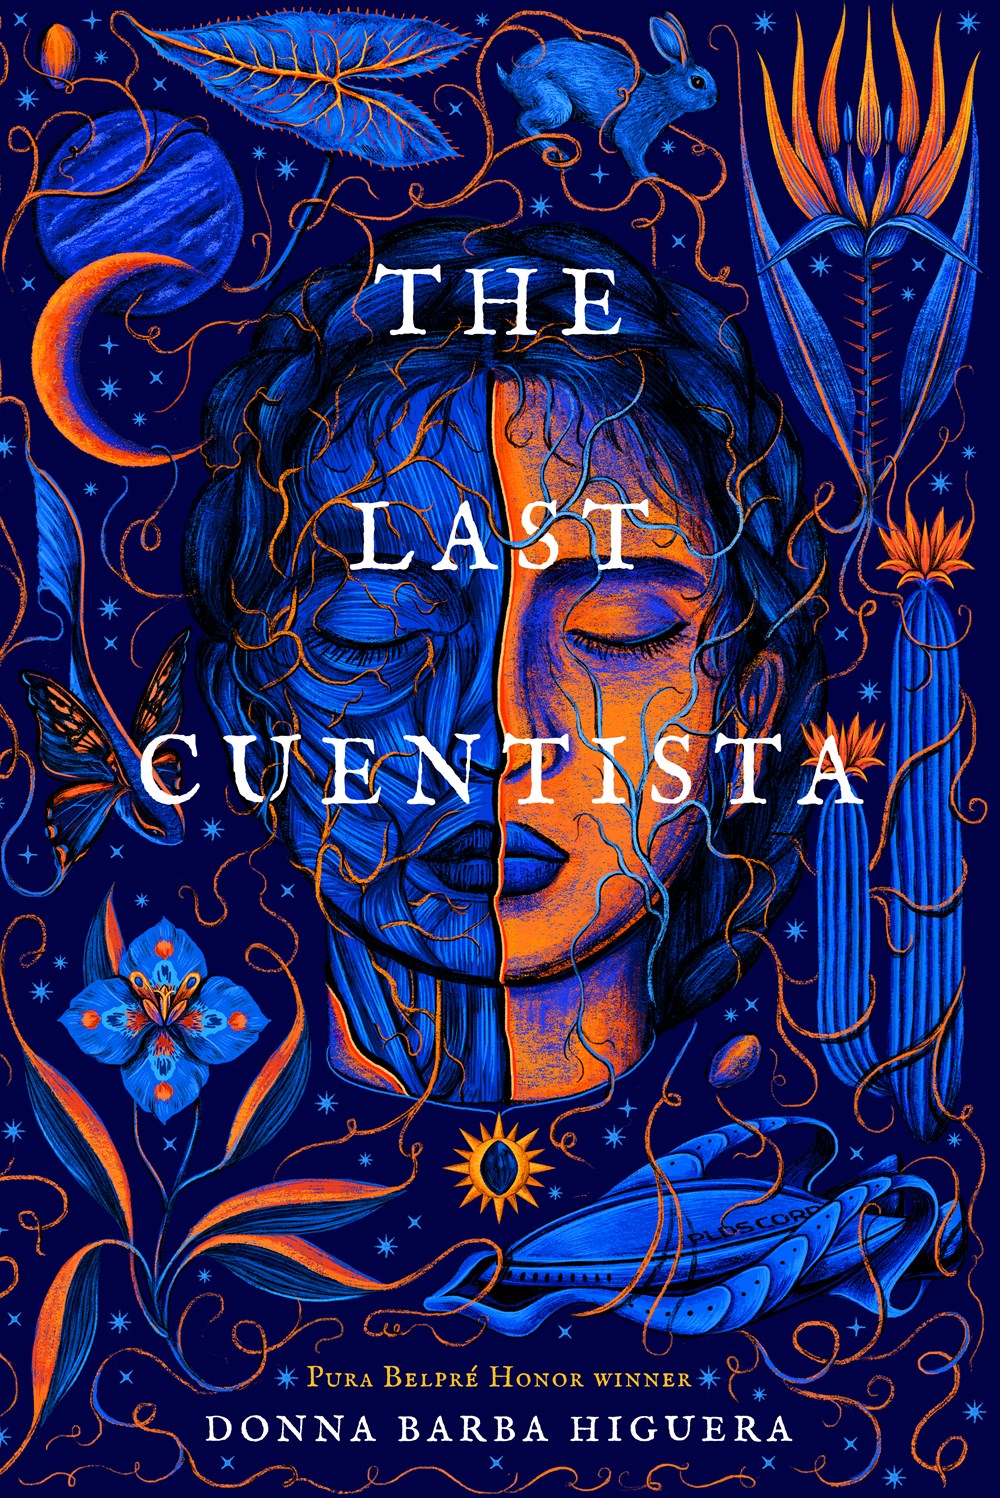 The Last Cuentista by Donna Barba Higuera, cover art is a stylized orange and royal blue woodcut appearing image of a young woman's face close up.